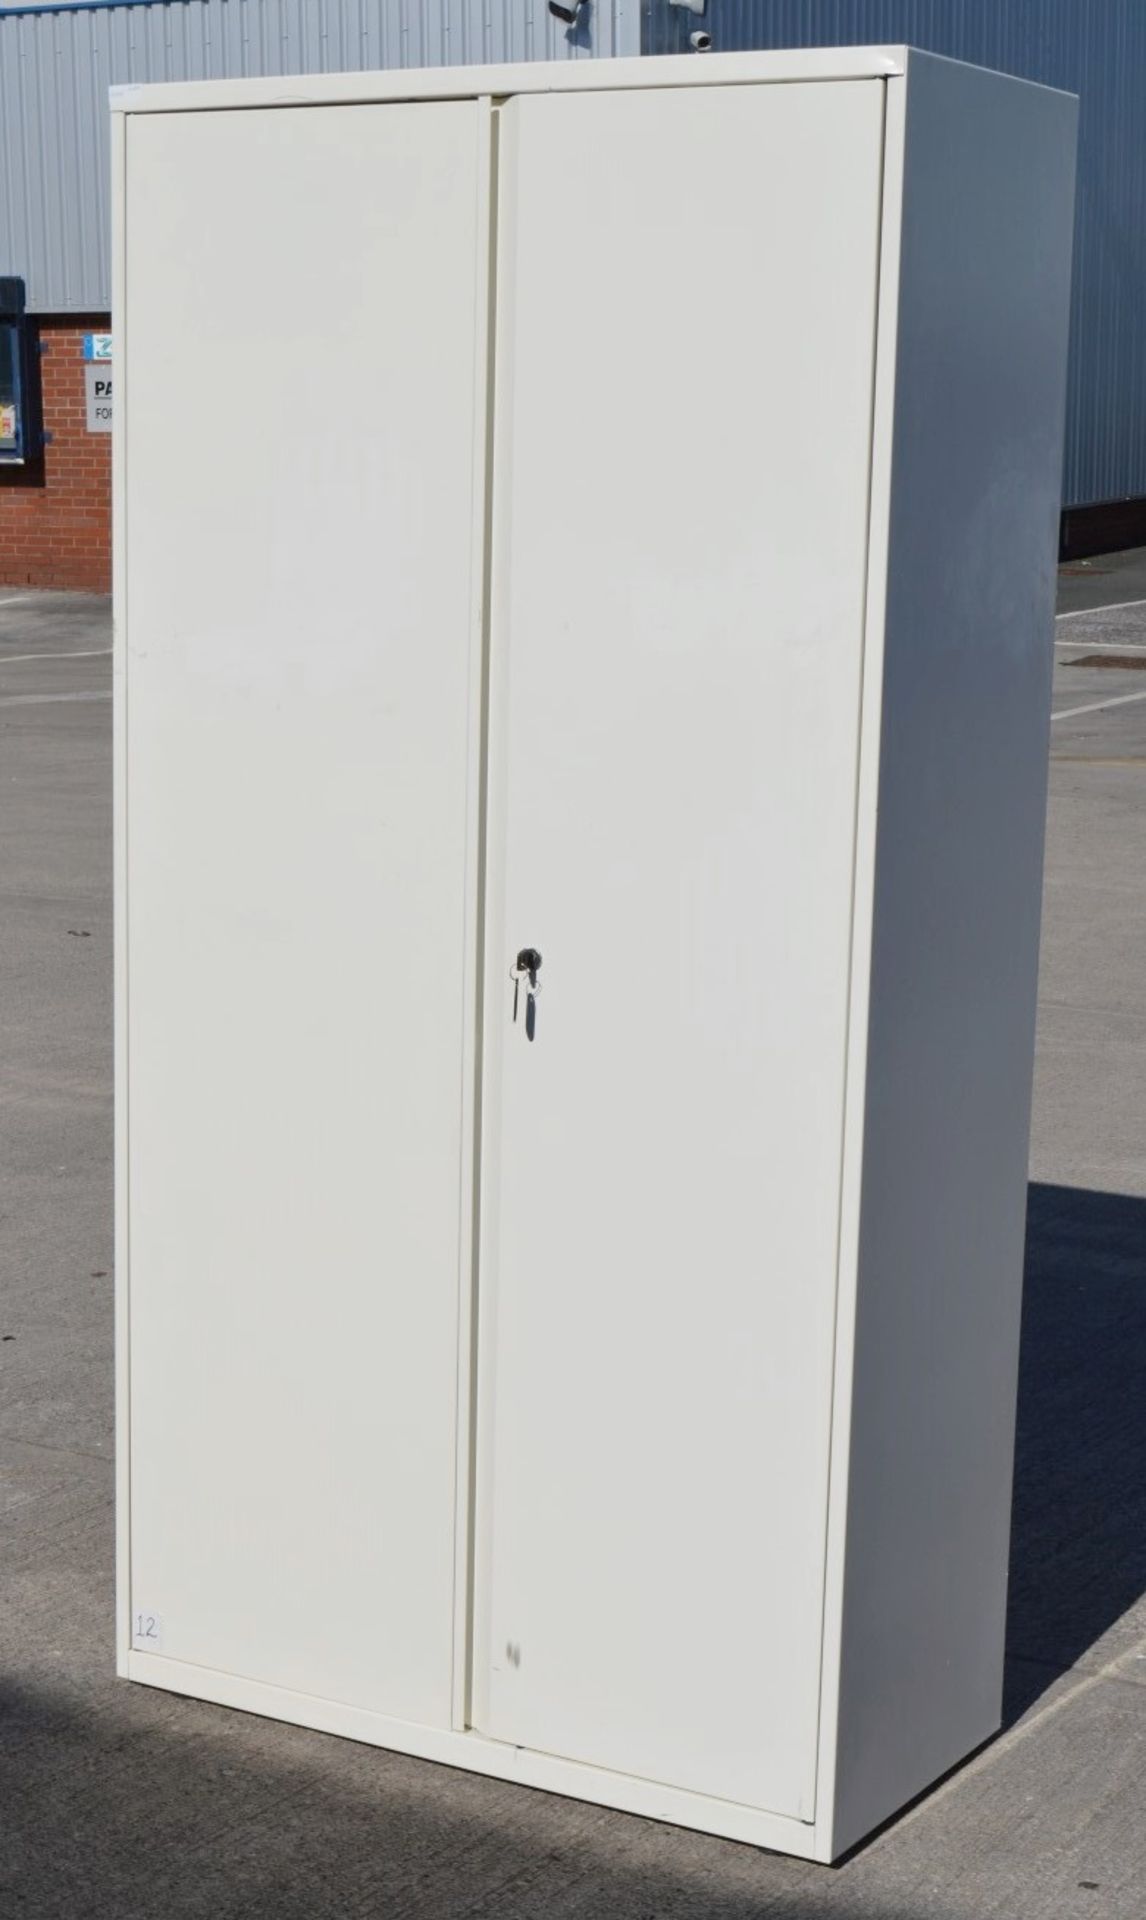 1 x Large BISLEY Metal Office Storage Cabinet With Key - Dimensions: H195 x W80 x D47cm - Used